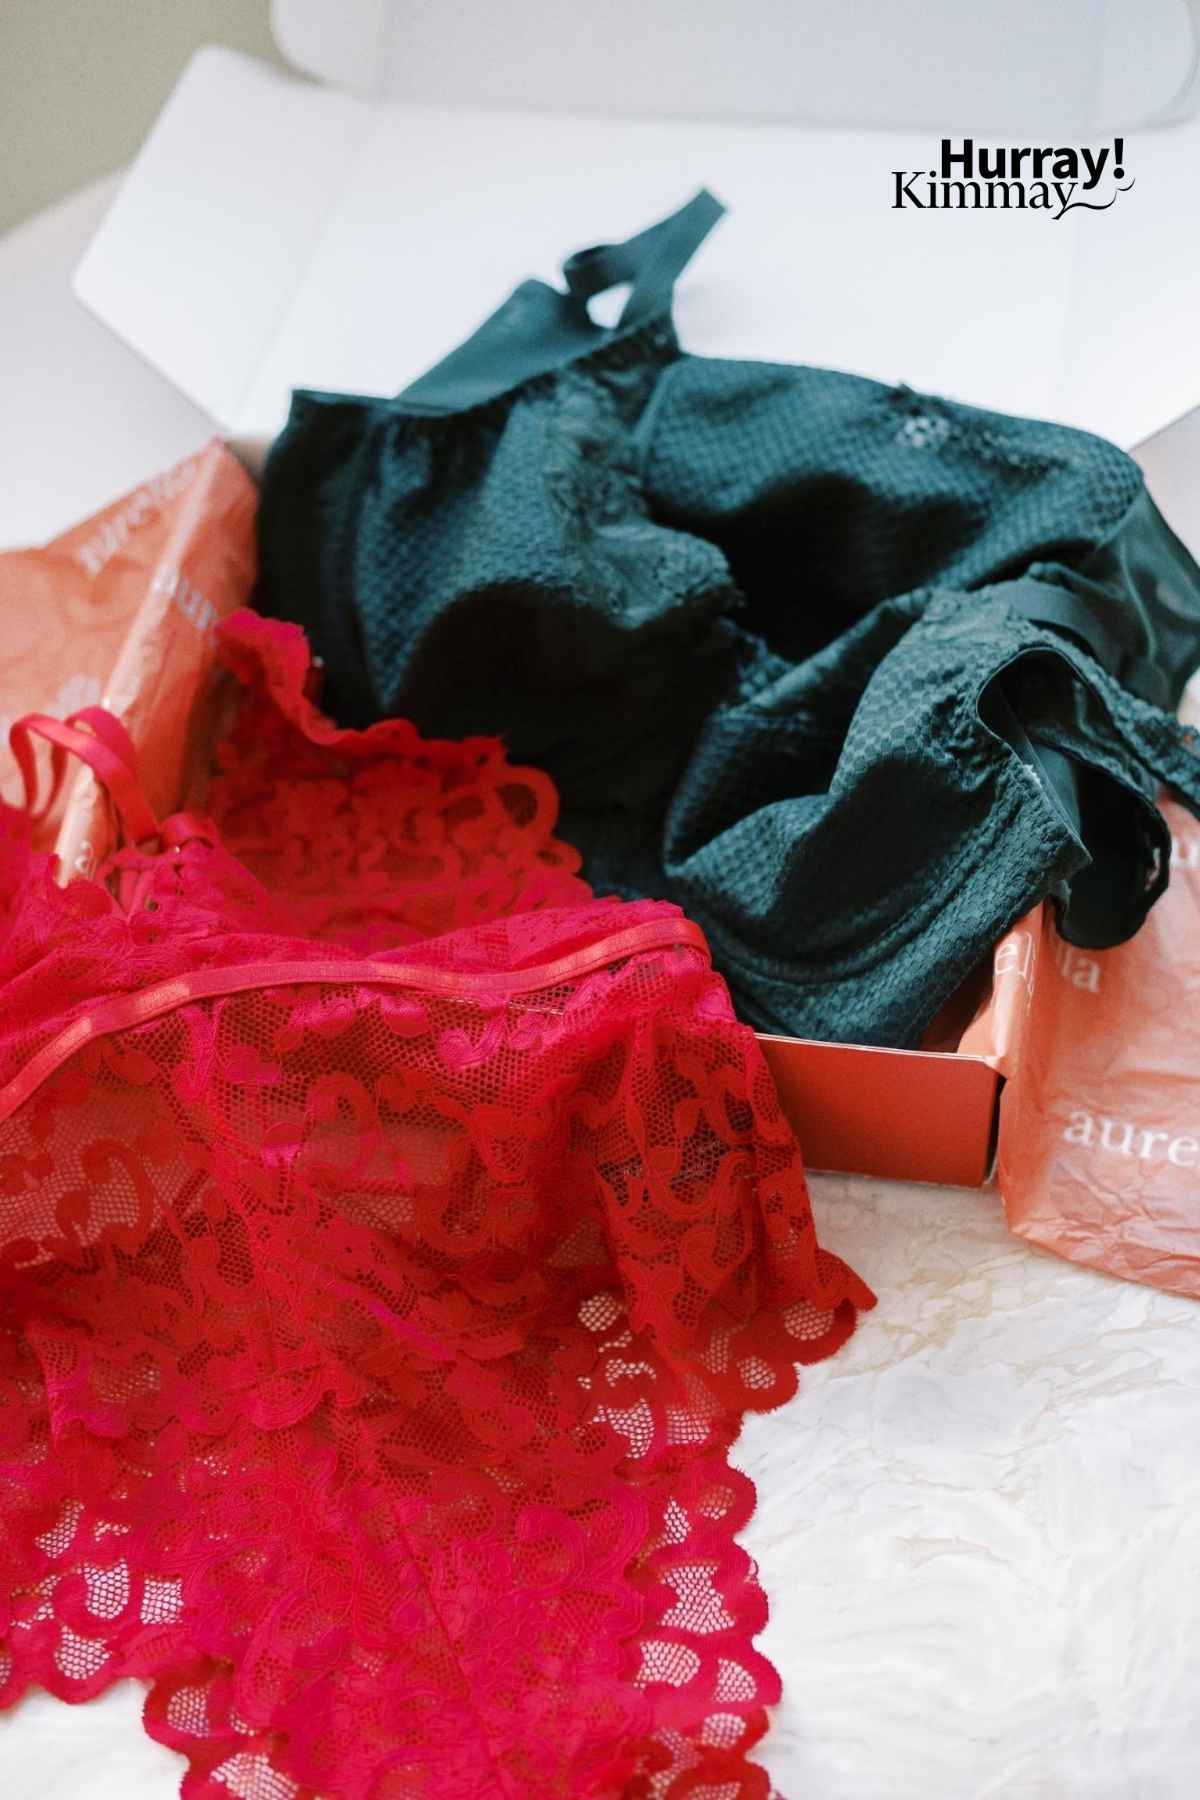 Are Lingerie Subscription Boxes Really Worth It? - Hurray Kimmay